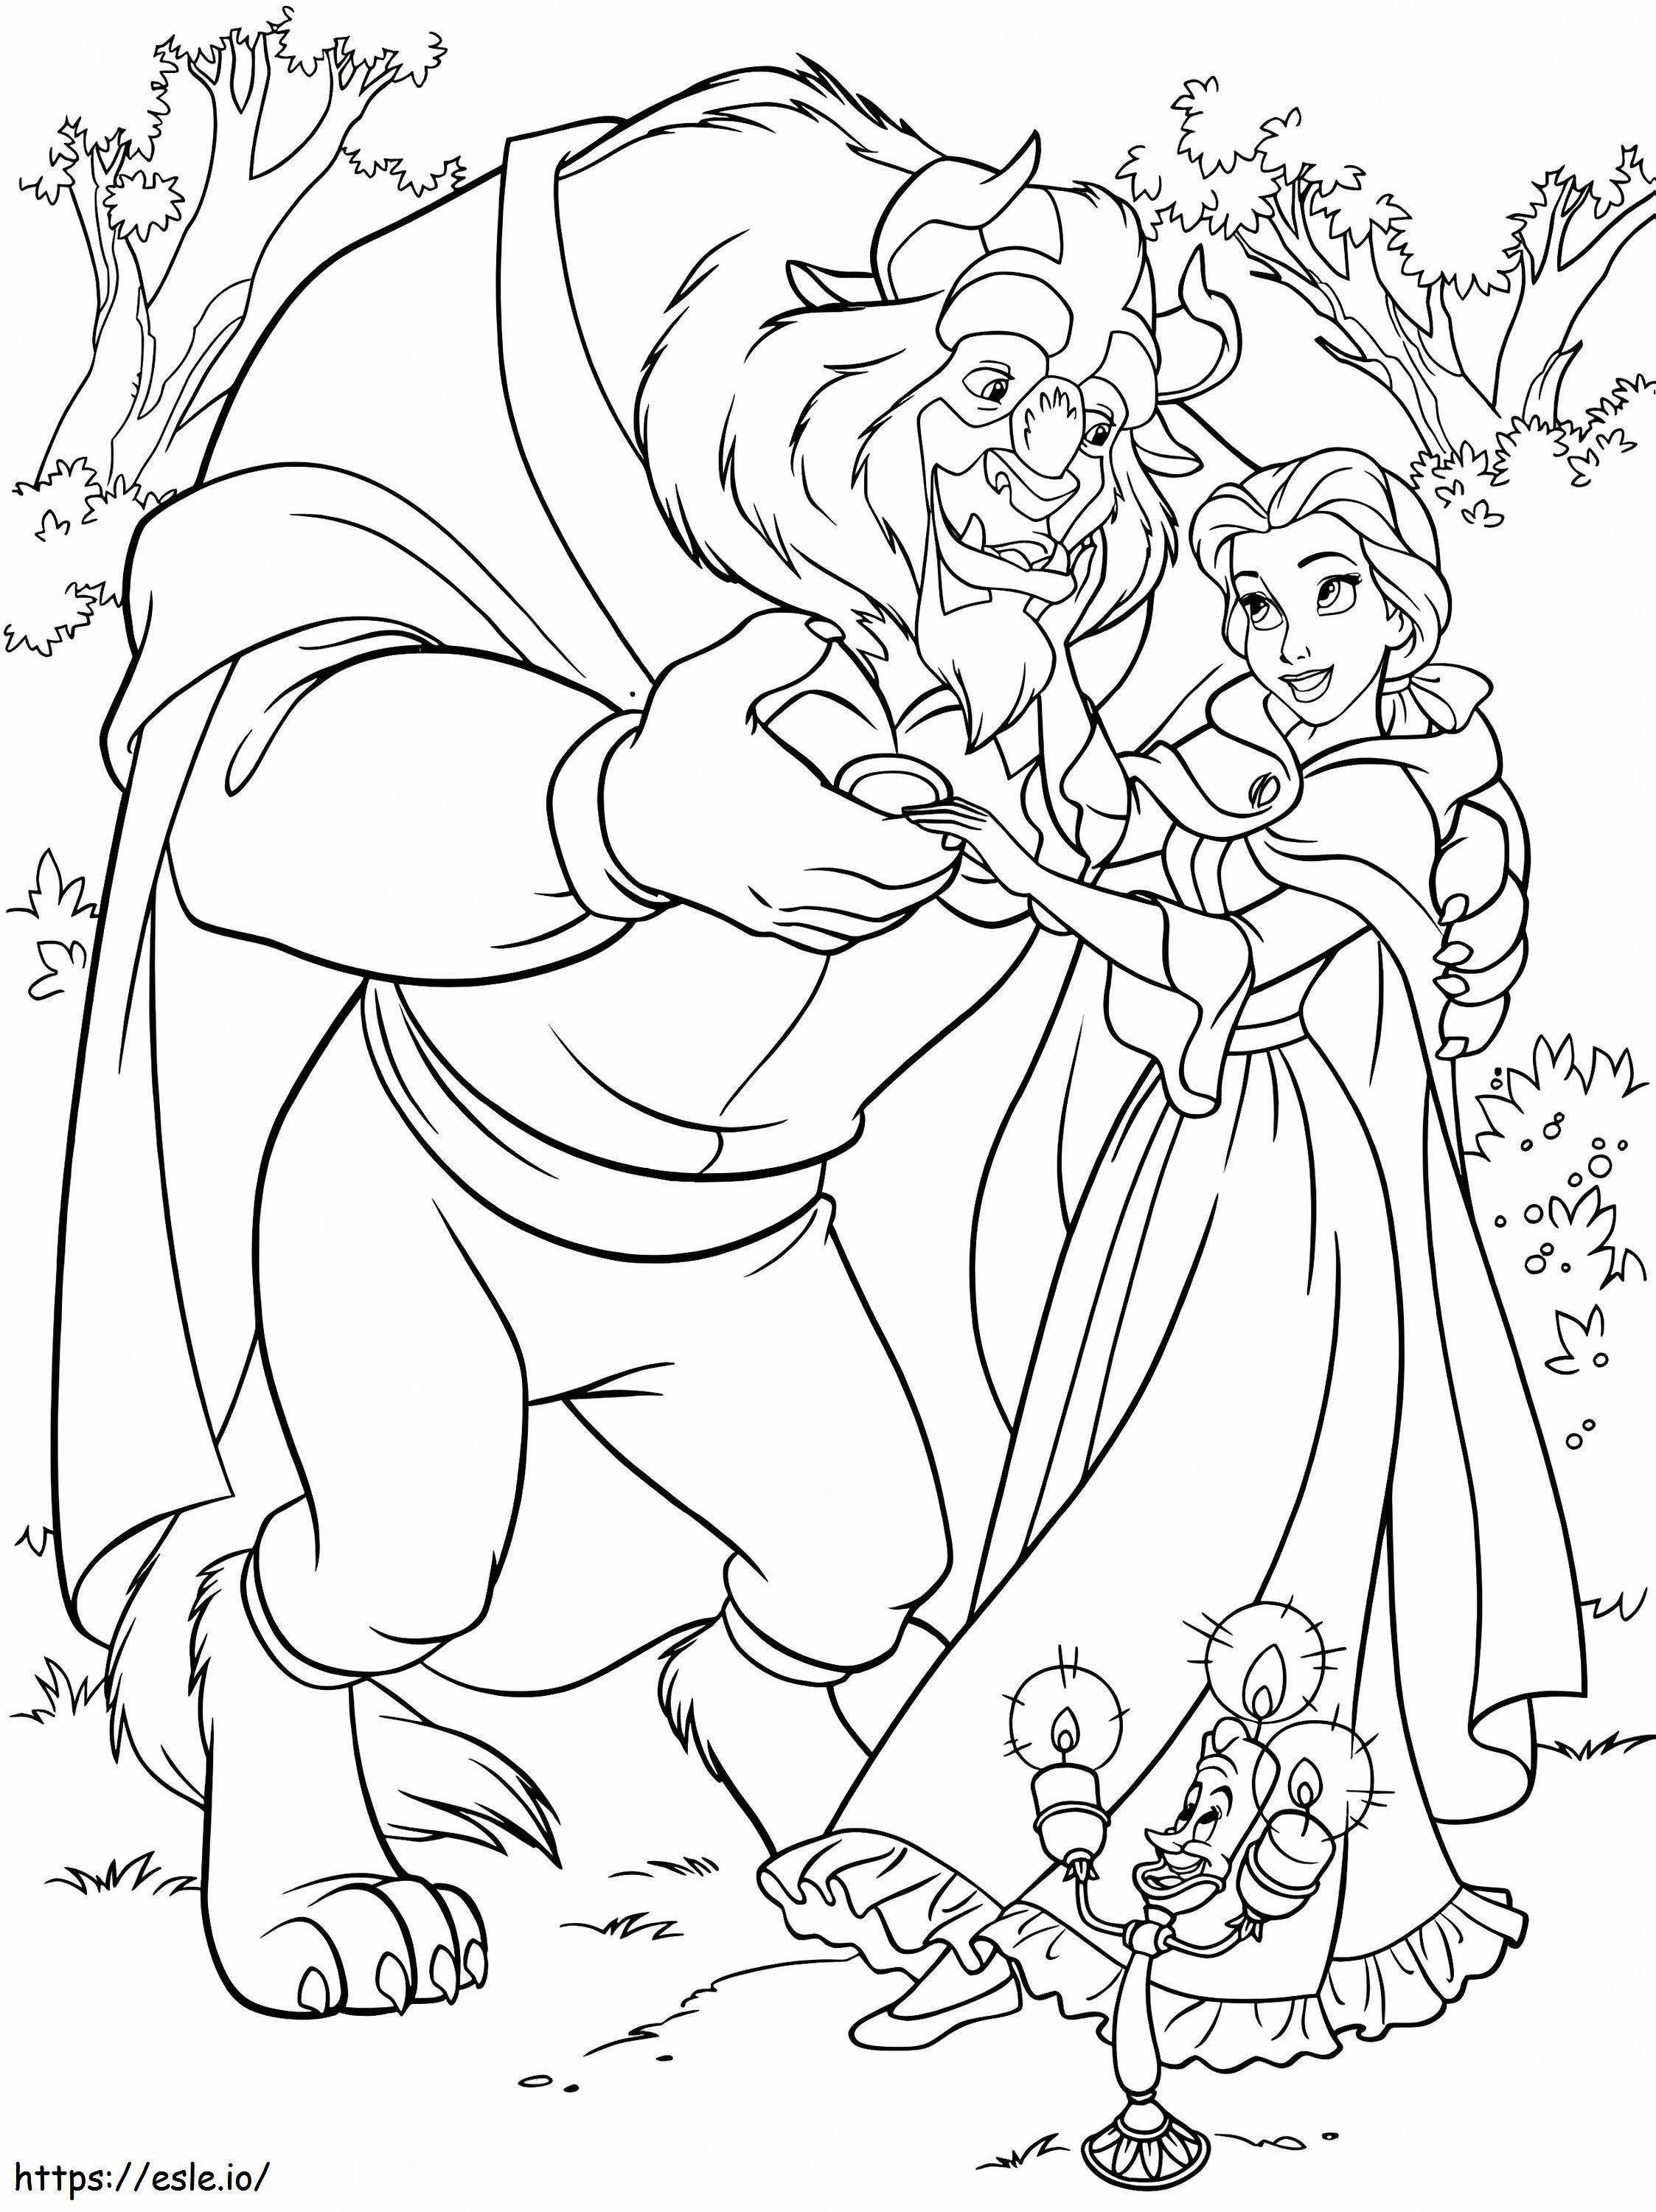 1560582925_Monster And Bella Dancing A4 coloring page